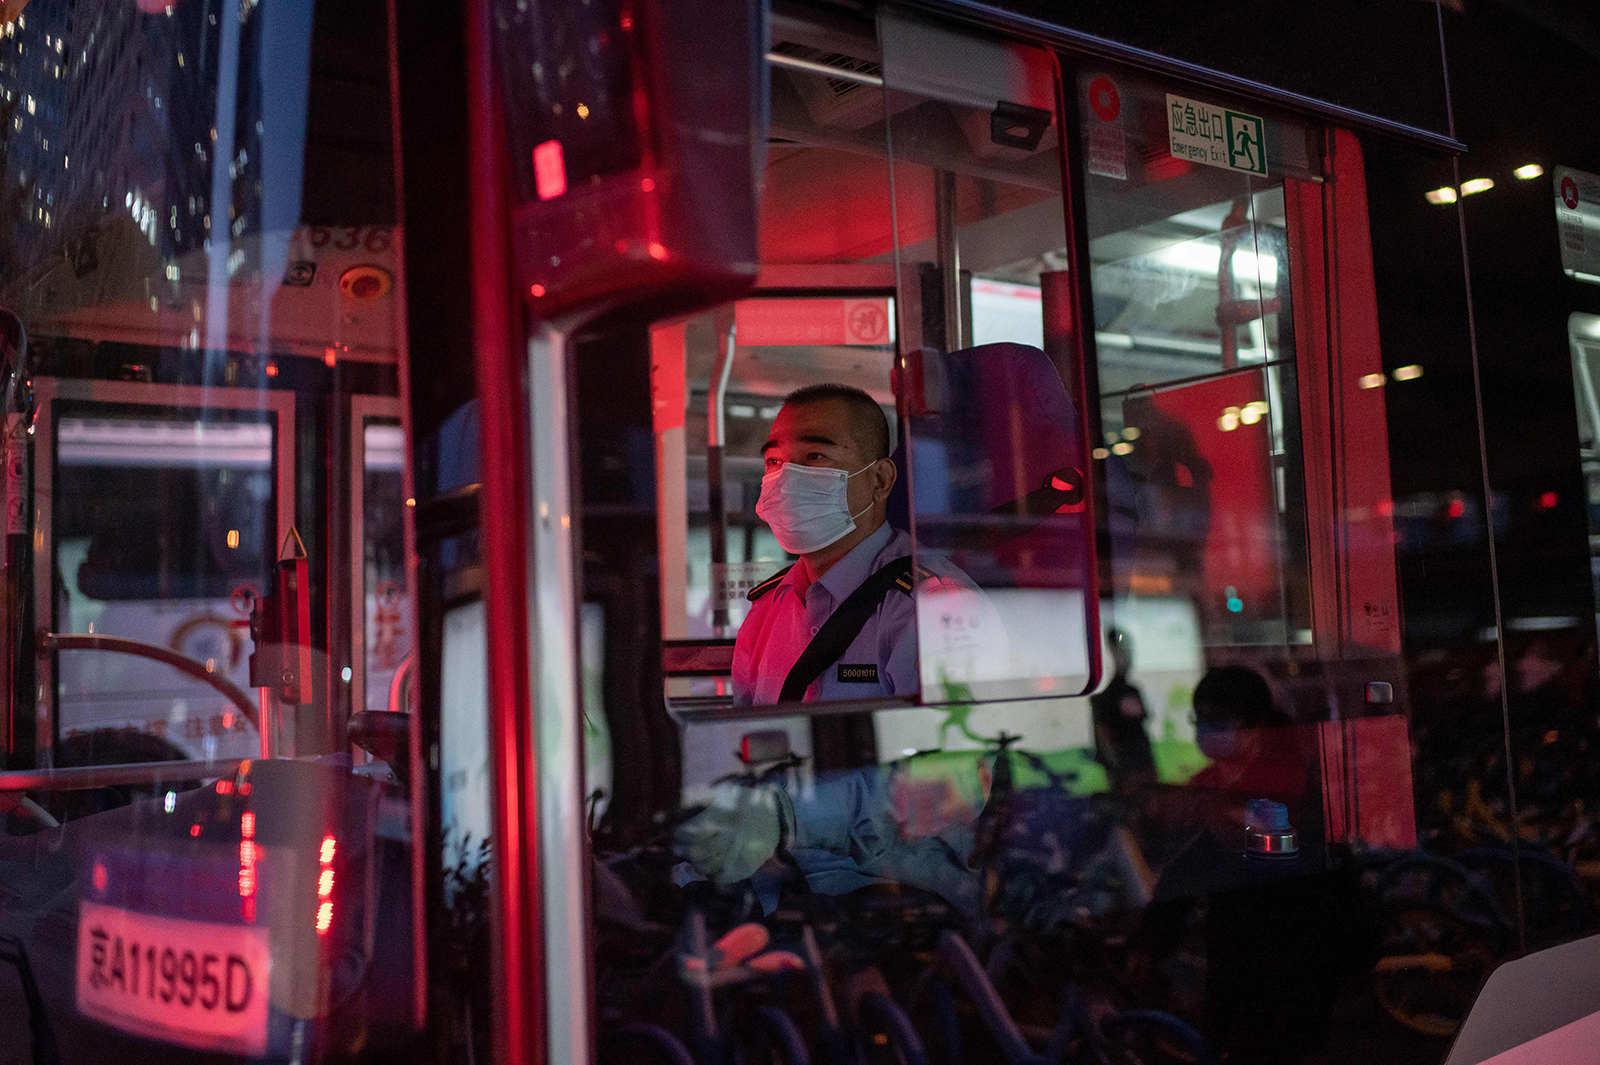 A bus driver arrives at a bus terminal during the evening rush hour in Beijing, on September 22.